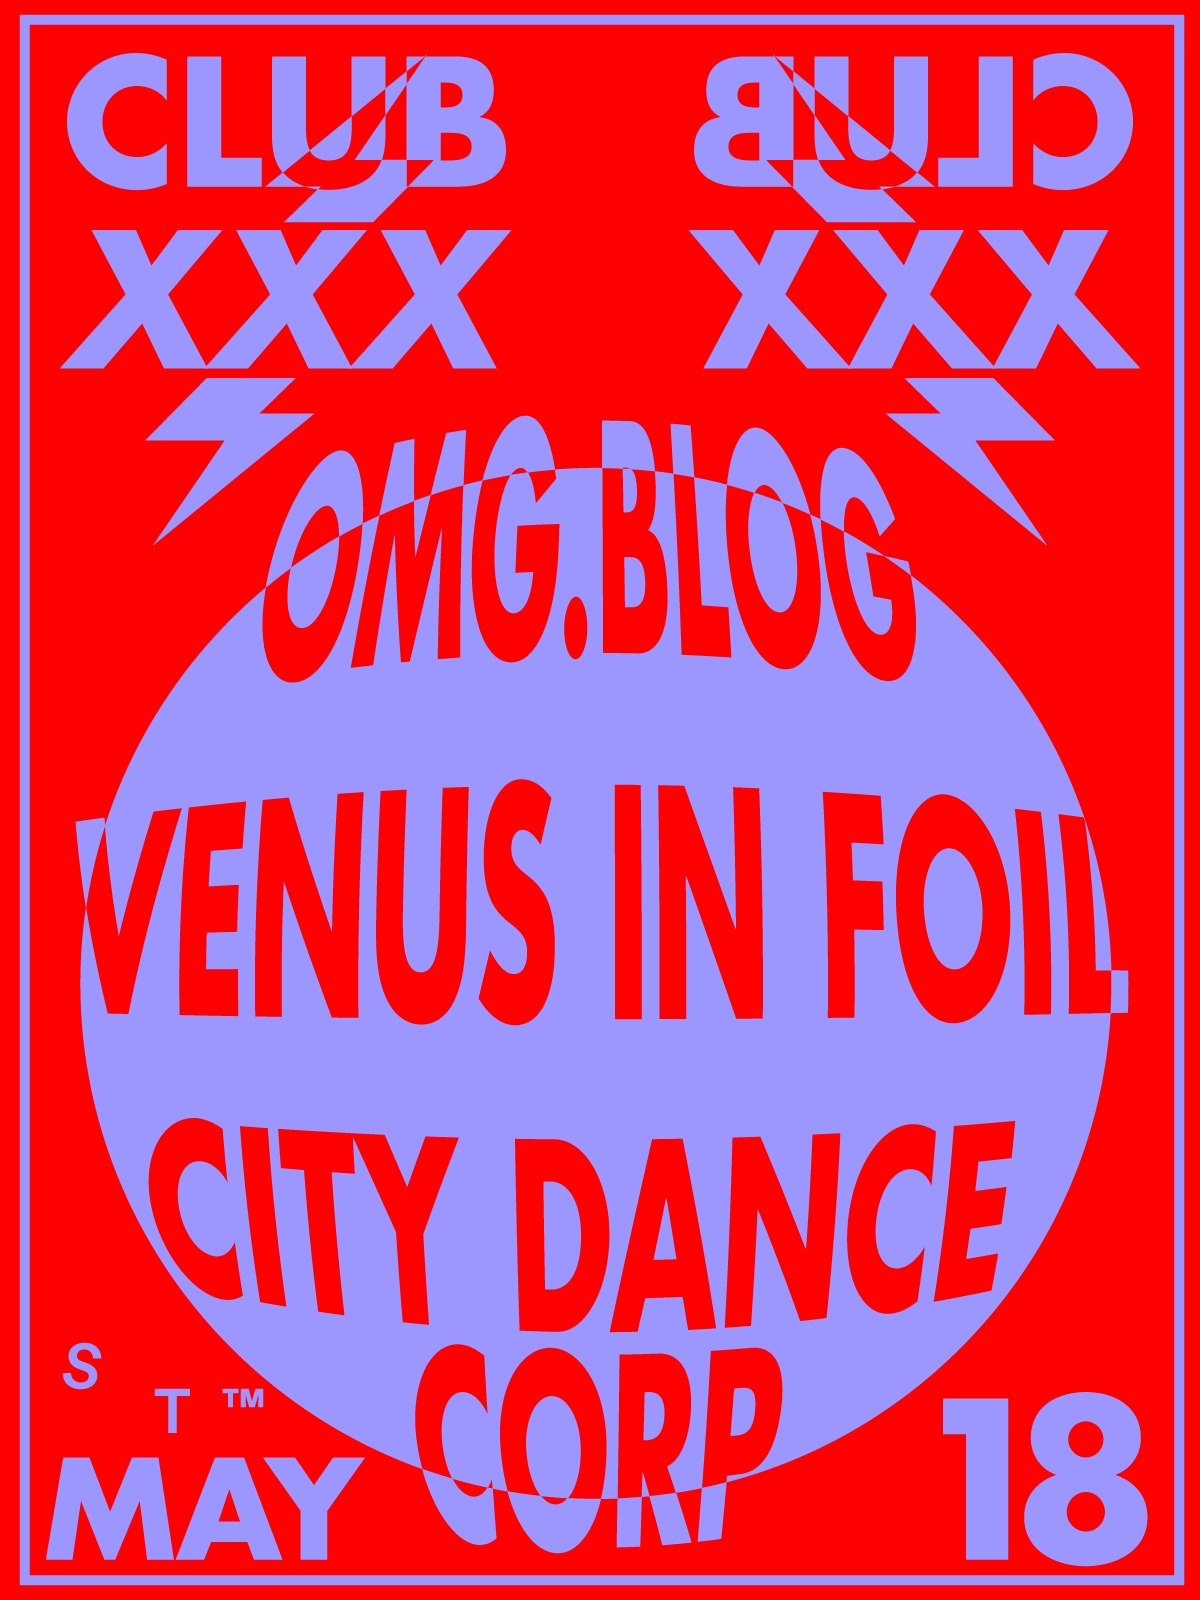 125: Club XXX featuring OMG.BLOG, Venus in Foil and City Dance Corporation  - Página frontal